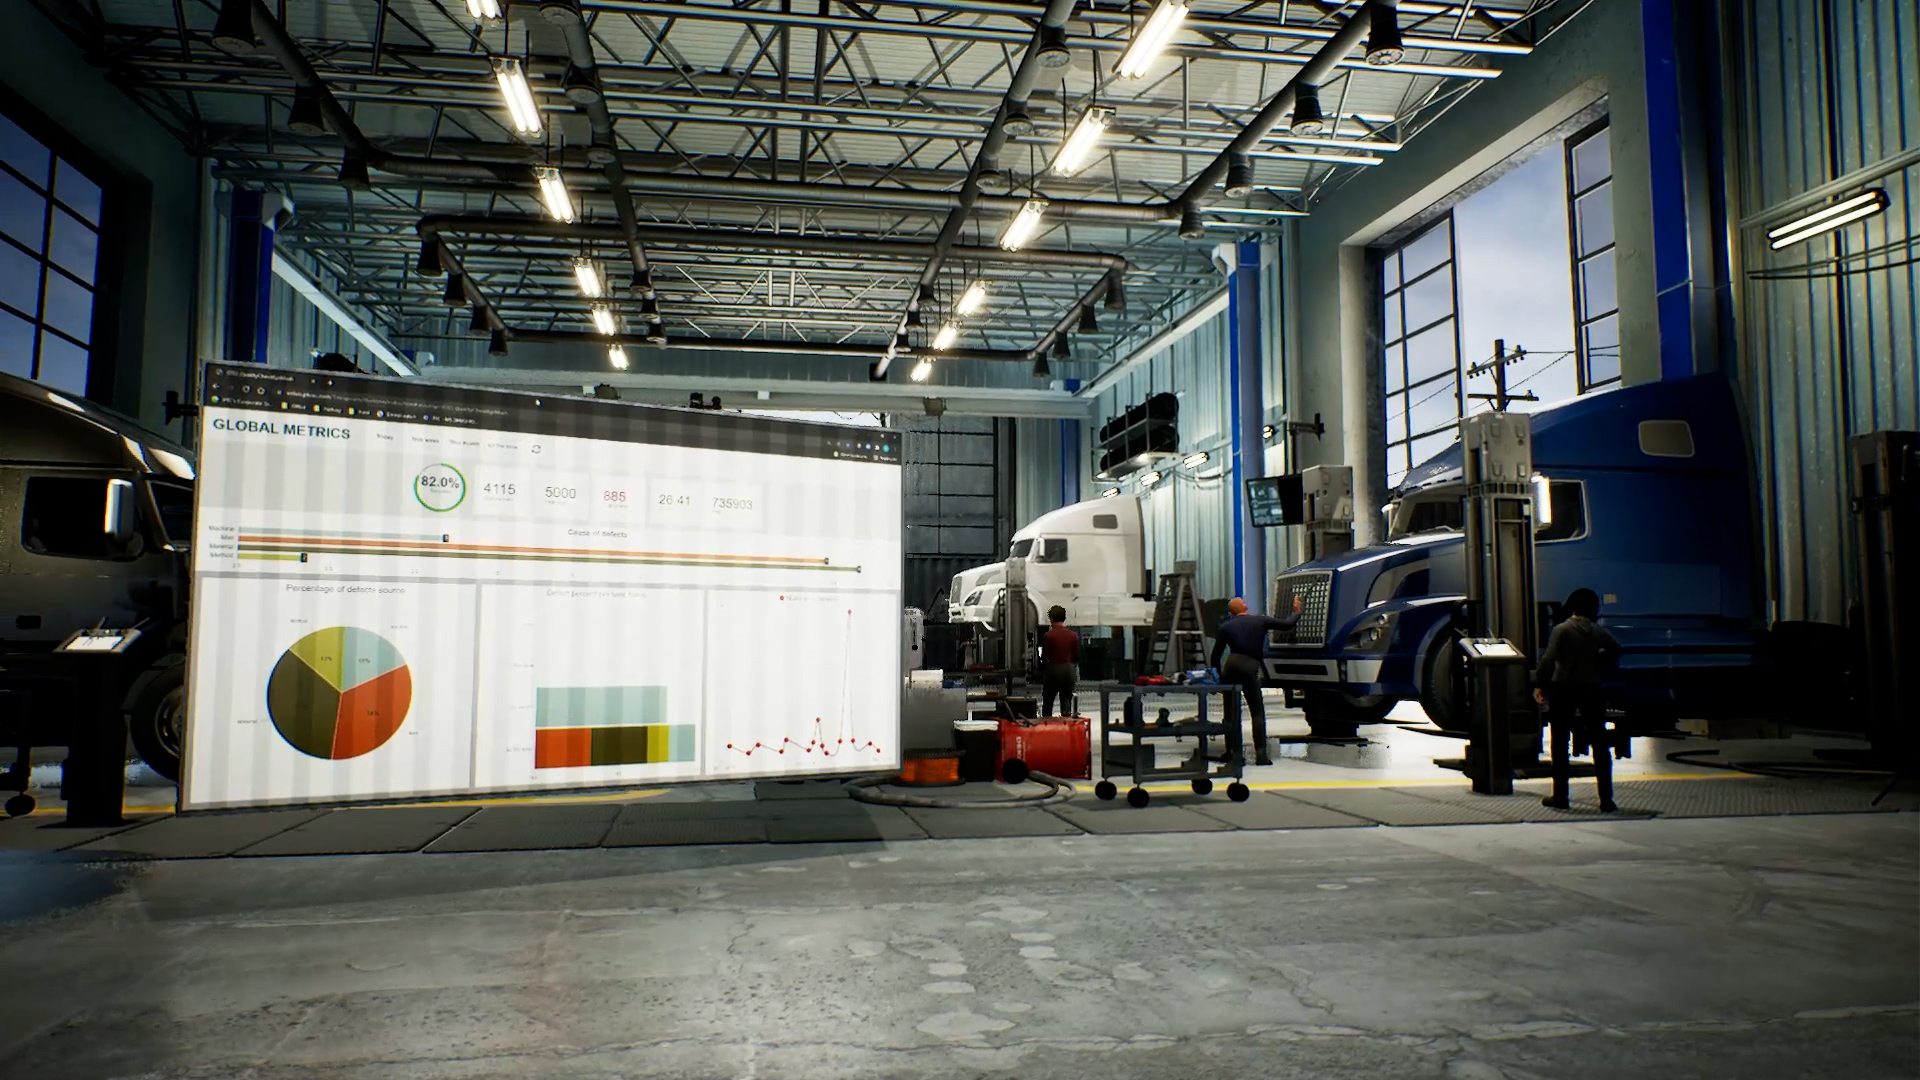 From office environments to manufacturers' facilities - PTC can seamlessly switch between both.